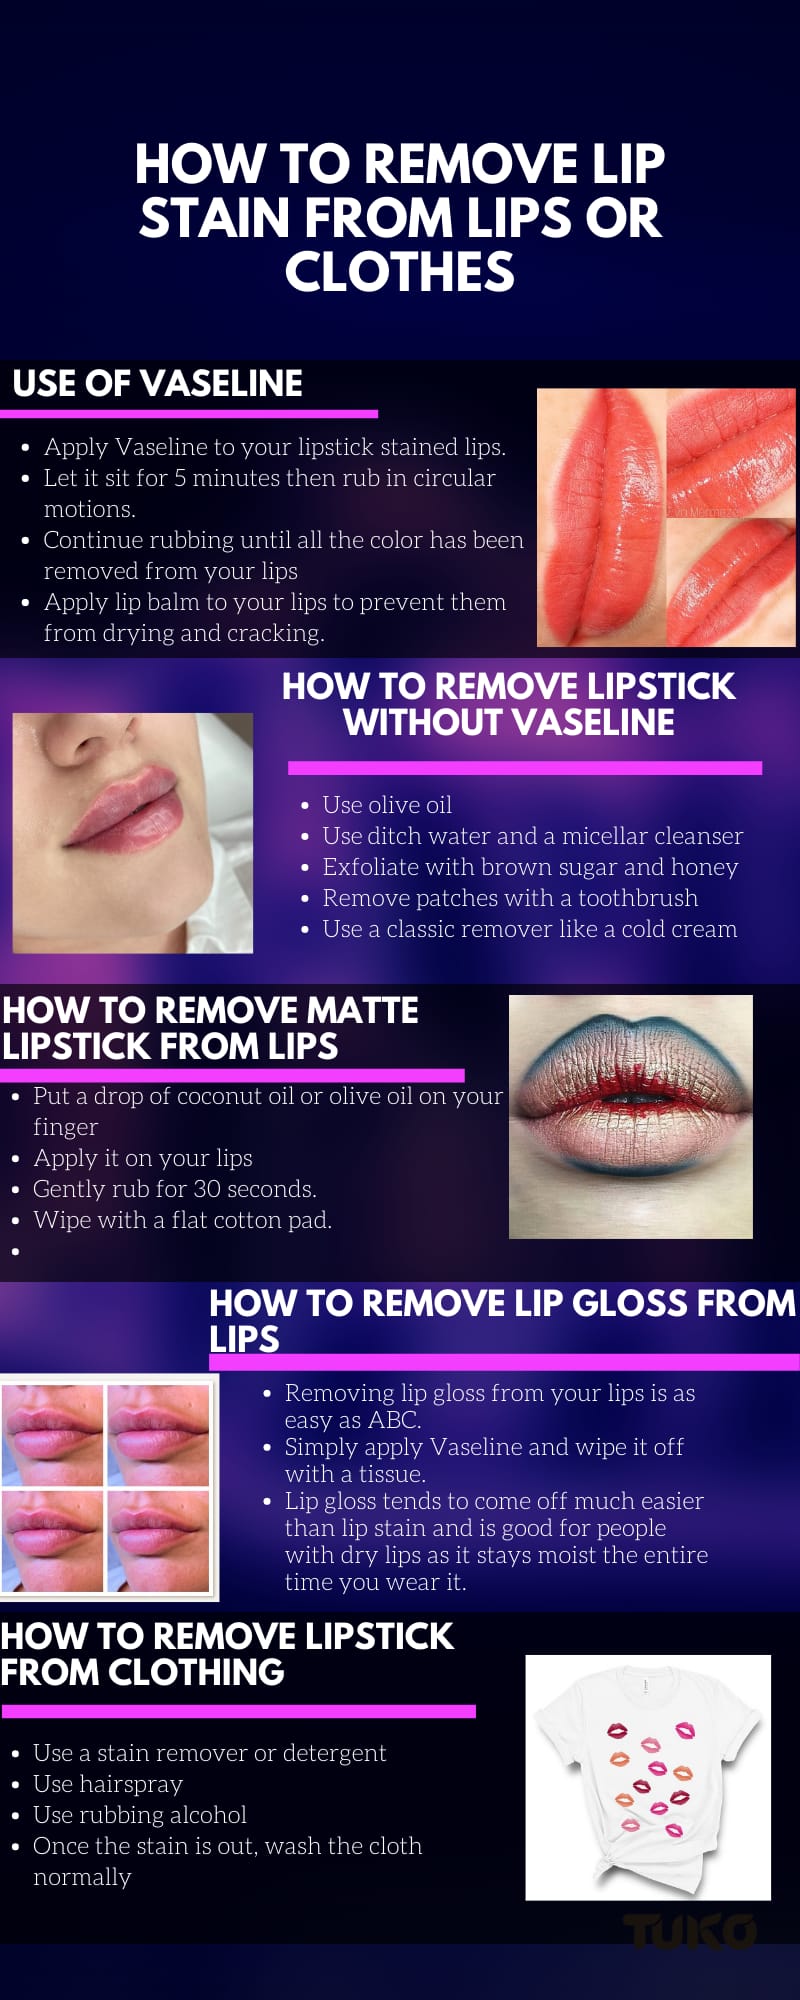 How to remove lip stain from lips